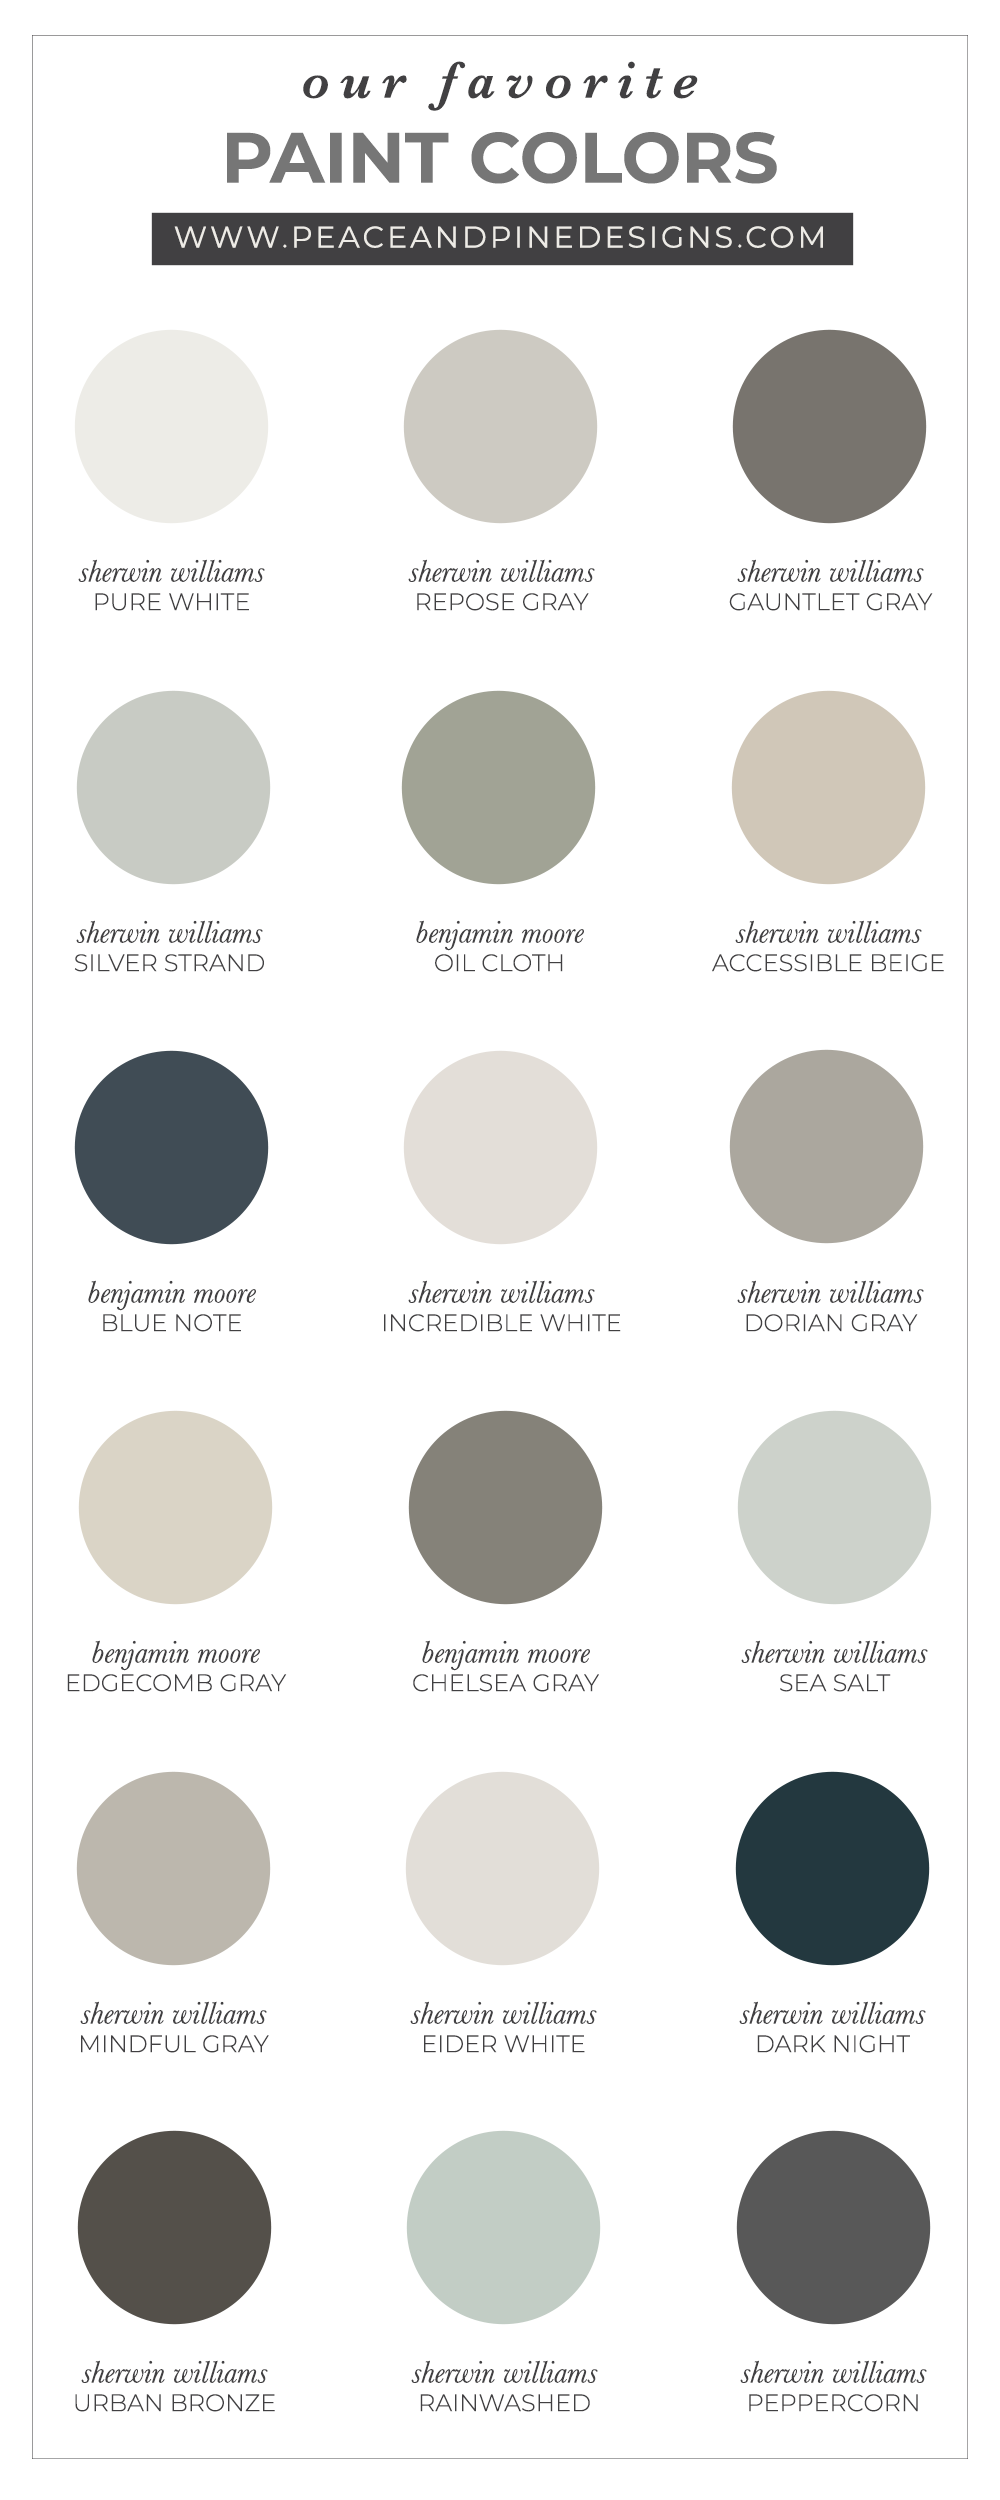 OUR FAVORITE PAINT COLORS PEACE AND PINE DESIGNS